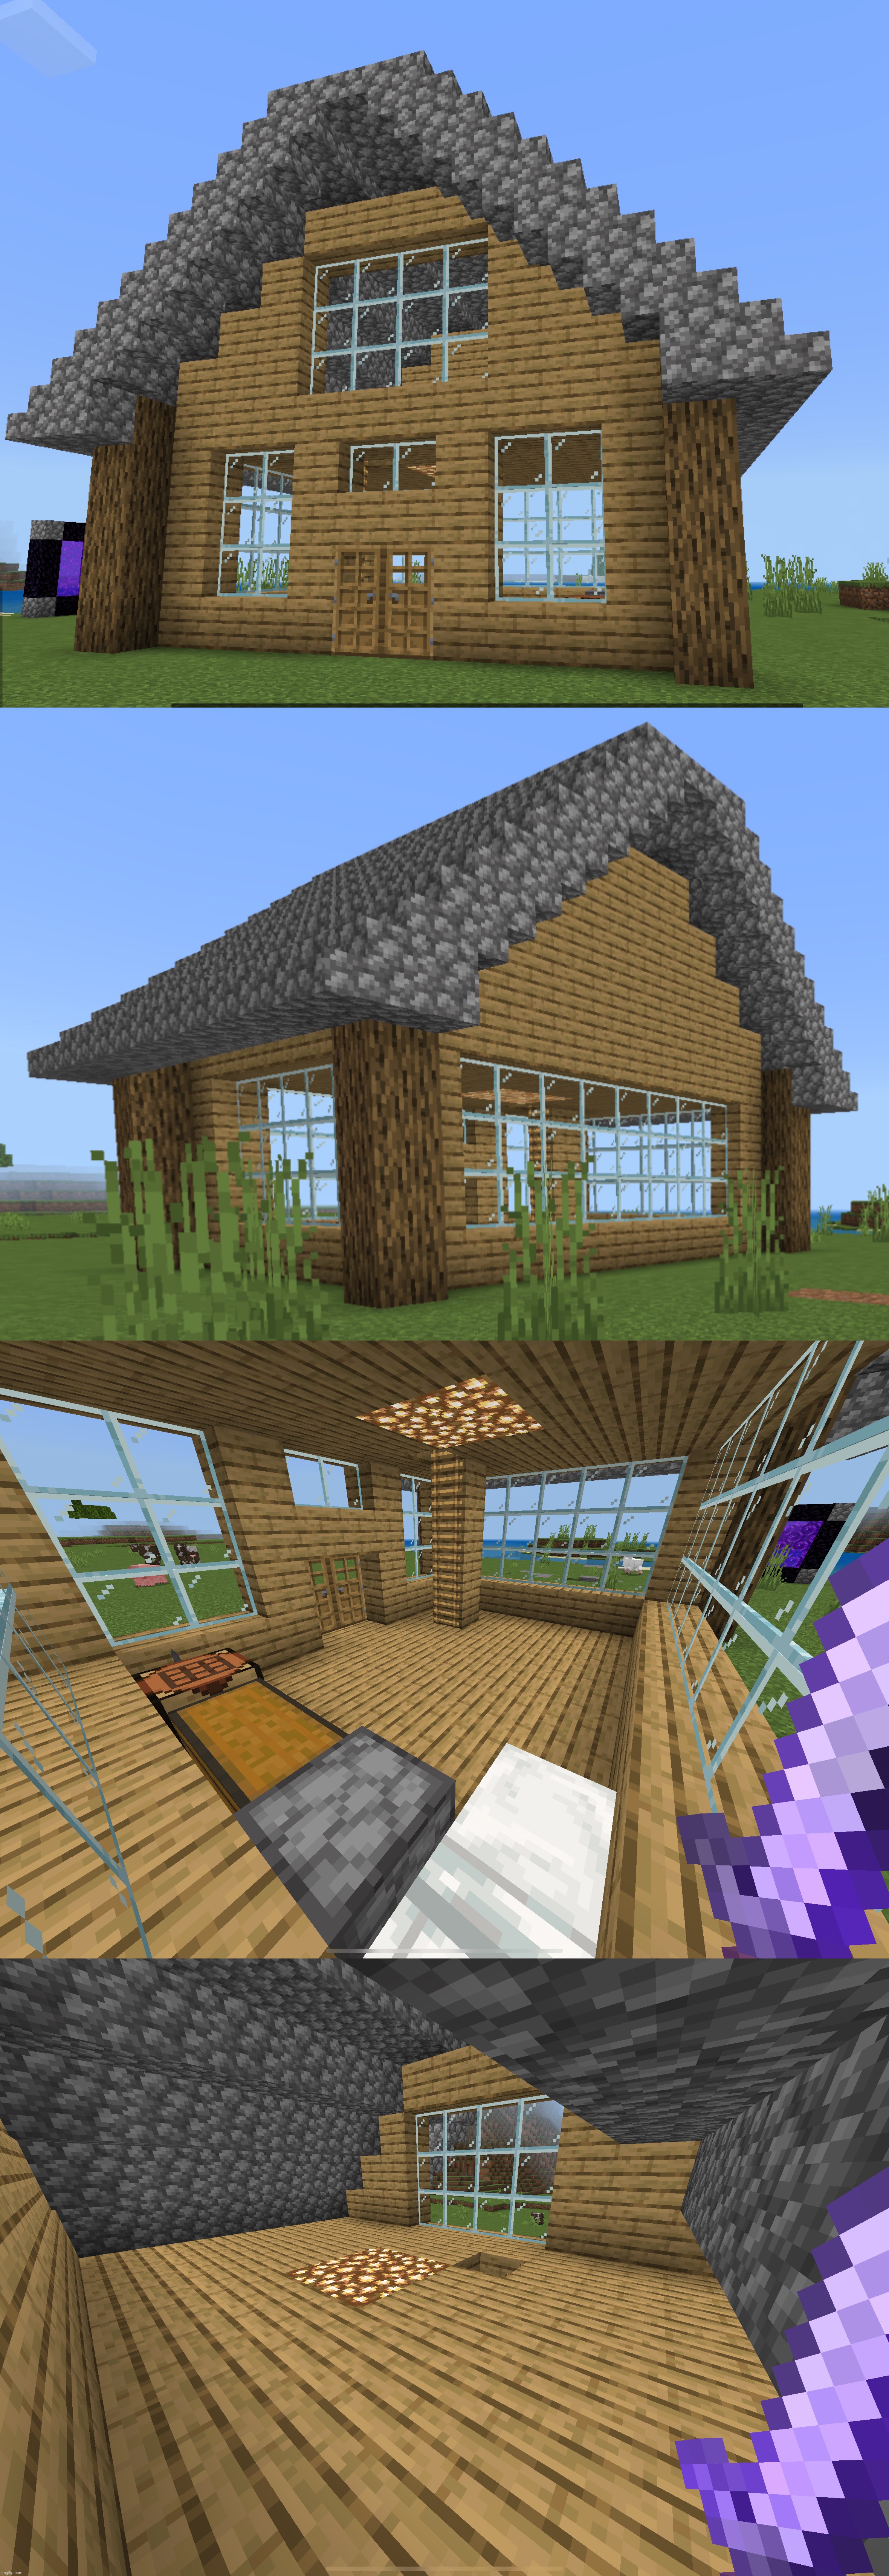 i built the survival house in minecraft classic : r/Minecraft